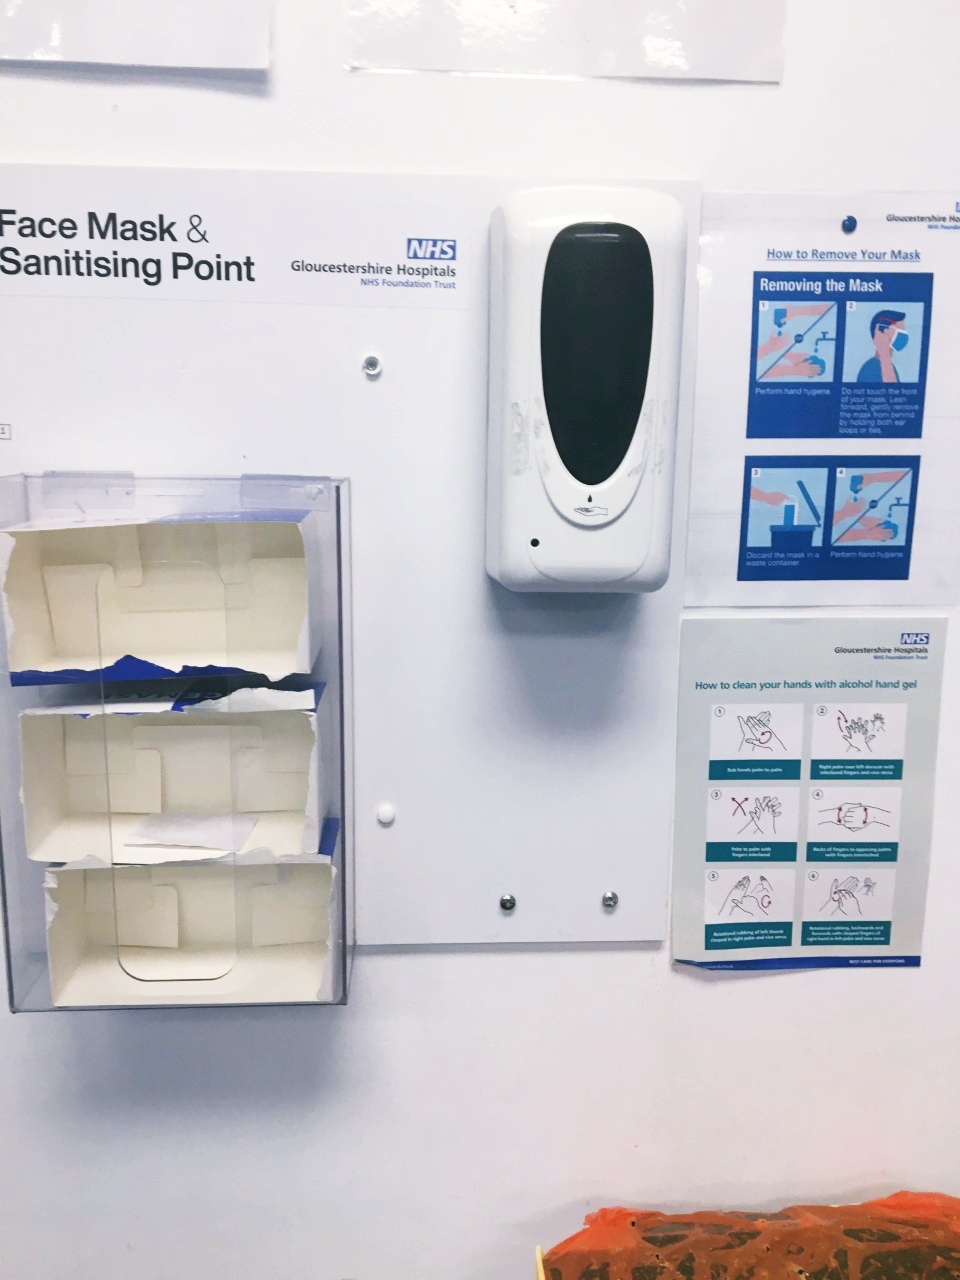 A photo of the "face mask and sanitising point" in the hospital, minus any sanitation or face masks.